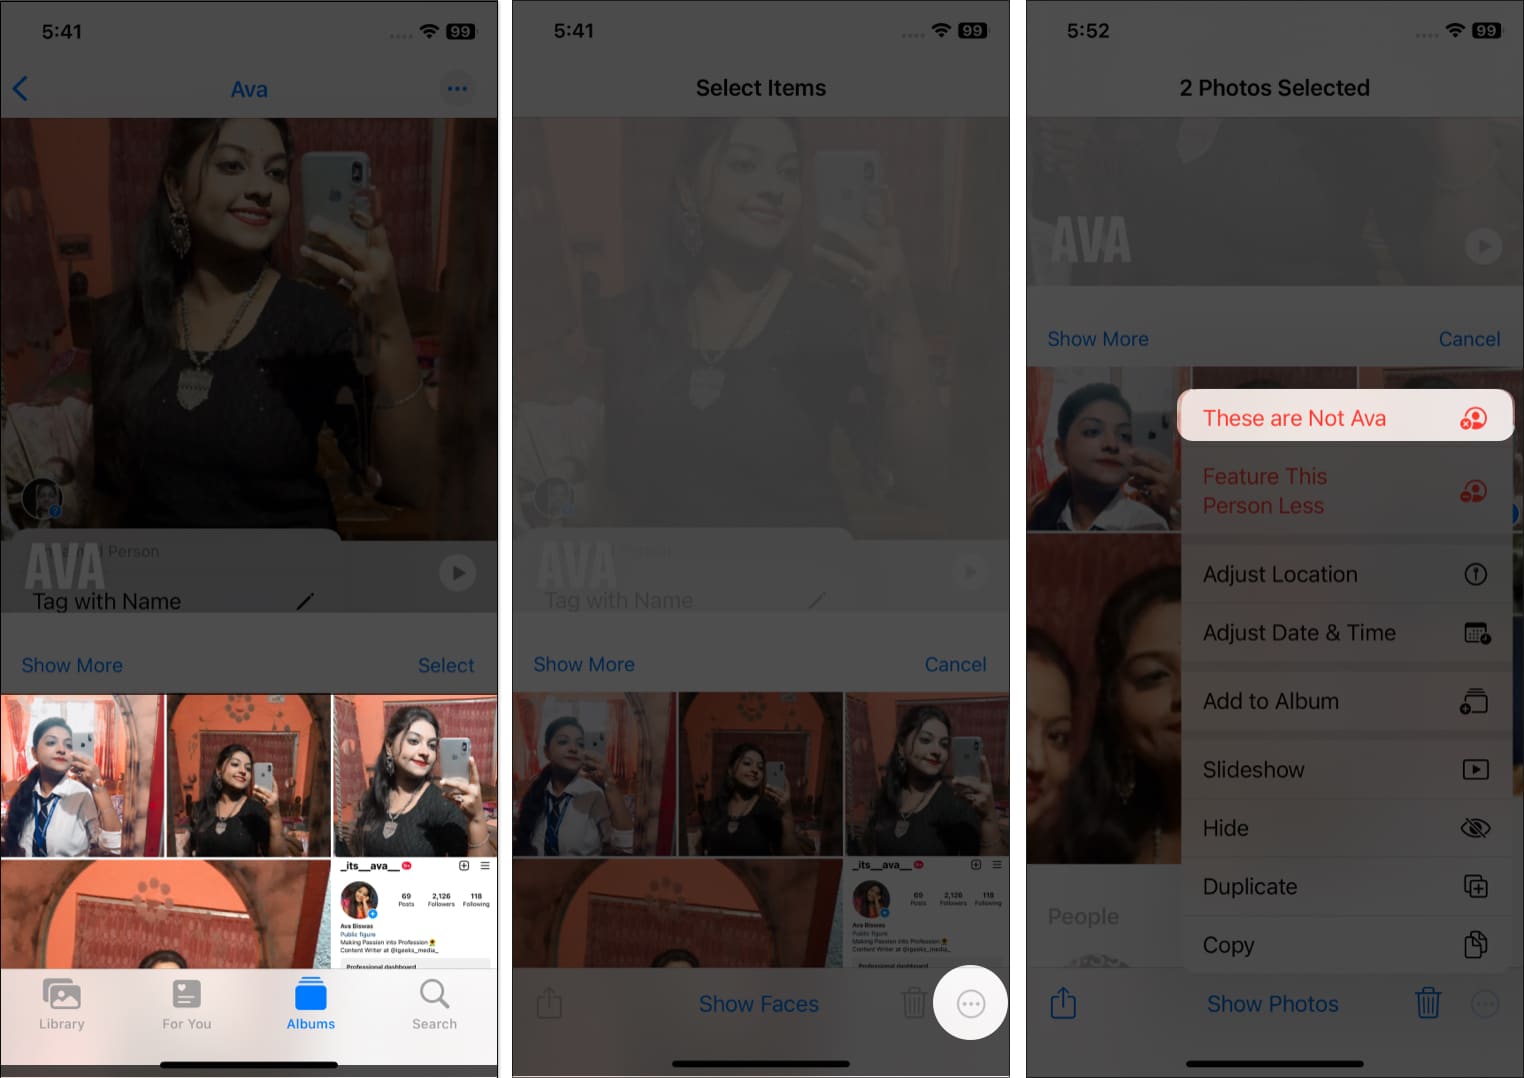 Remove photos from People Album on iPhone